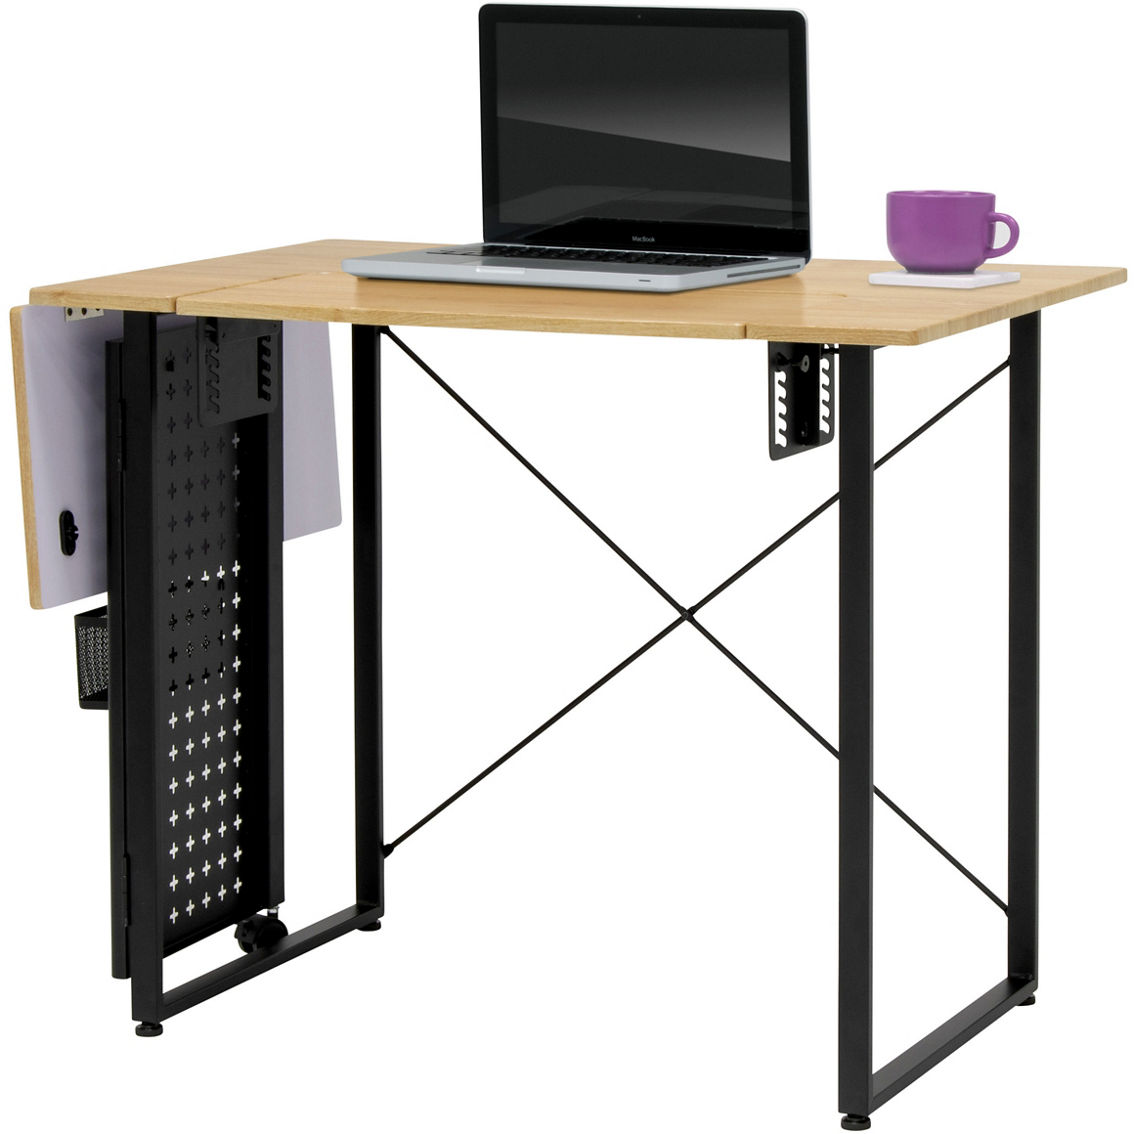 Studio Designs Pivot Sewing Table with Swingout Storage Panel - Image 6 of 10